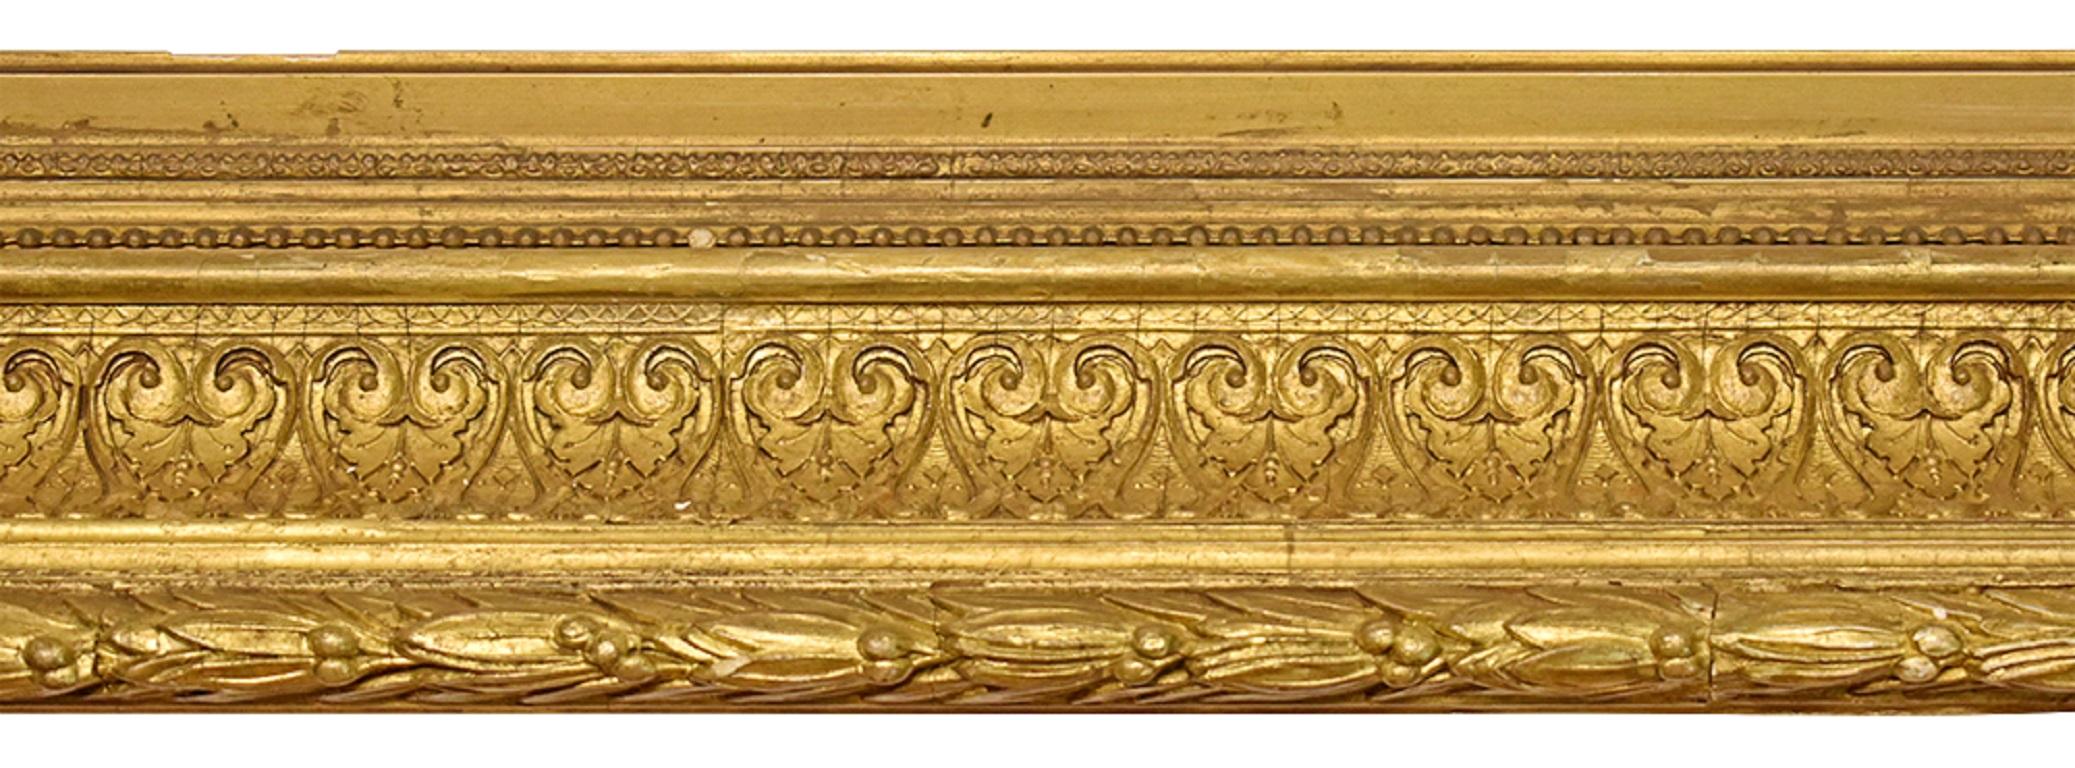 American Classical American 24x33 inch Hudson River Gilded Gesso Picture Frame Circa 1875 For Sale